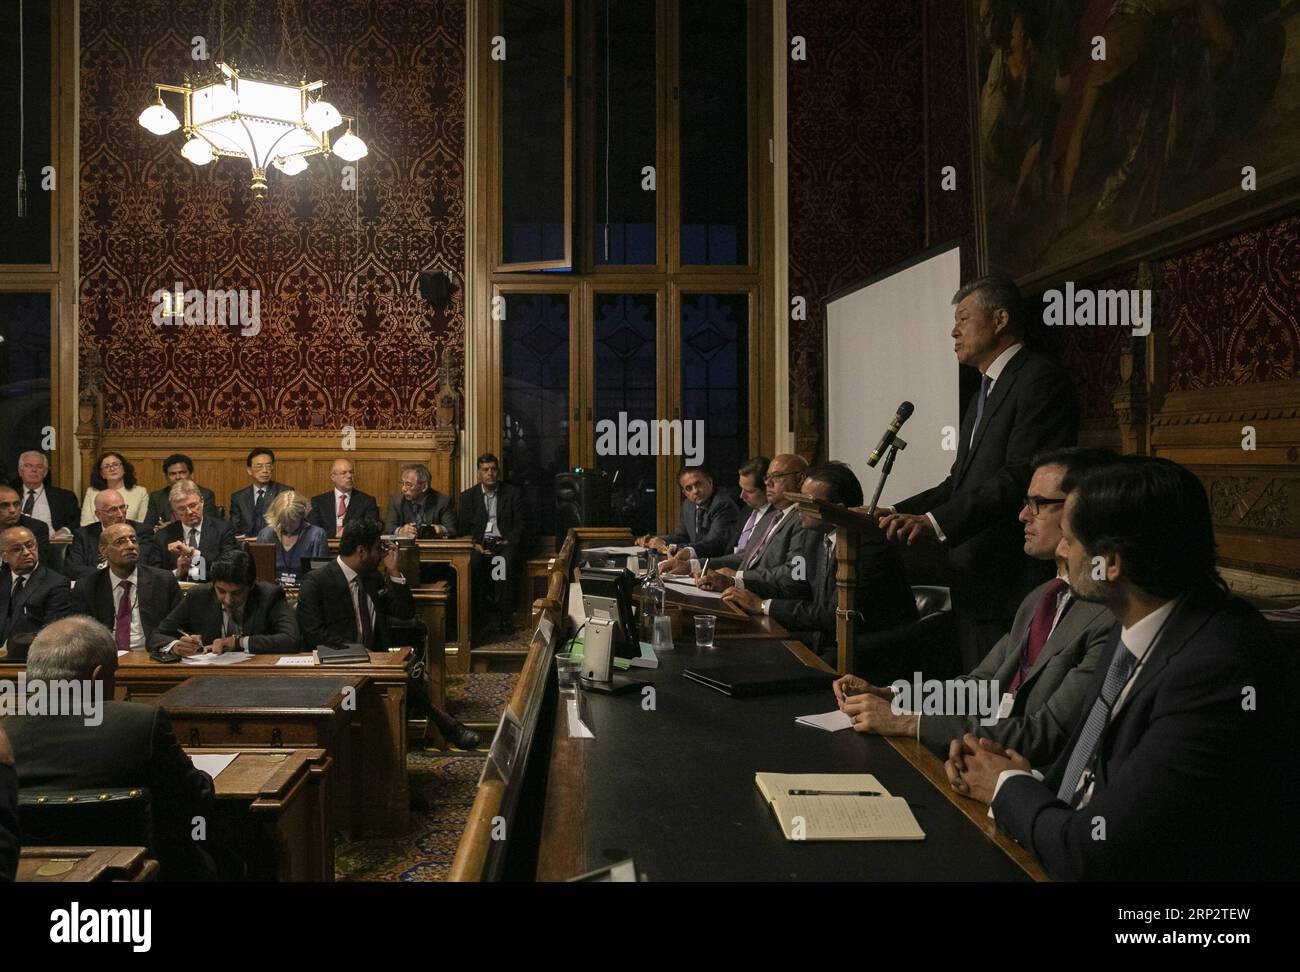 (180911) -- LONDON, Sept. 11, 2018 -- Chinese Ambassador to Britain Liu Xiaoming (3rd R) delivers a keynote speech during the launching ceremony of the All-Party Parliamentary Group (APPG) for the Belt and Road Initiative (BRI) and China-Pakistan Economic Corridor (CPEC), in London, Britain on Sept. 10, 2018. Chinese Ambassador to Britain Liu Xiaoming said on Monday that he hopes the newly launched UK parliament group for the Belt and Road Initiative will serve as a bridge of communication and bring in more British public support for and participation in the initiative. ) (lrz) BRITAIN-LONDON- Stock Photo